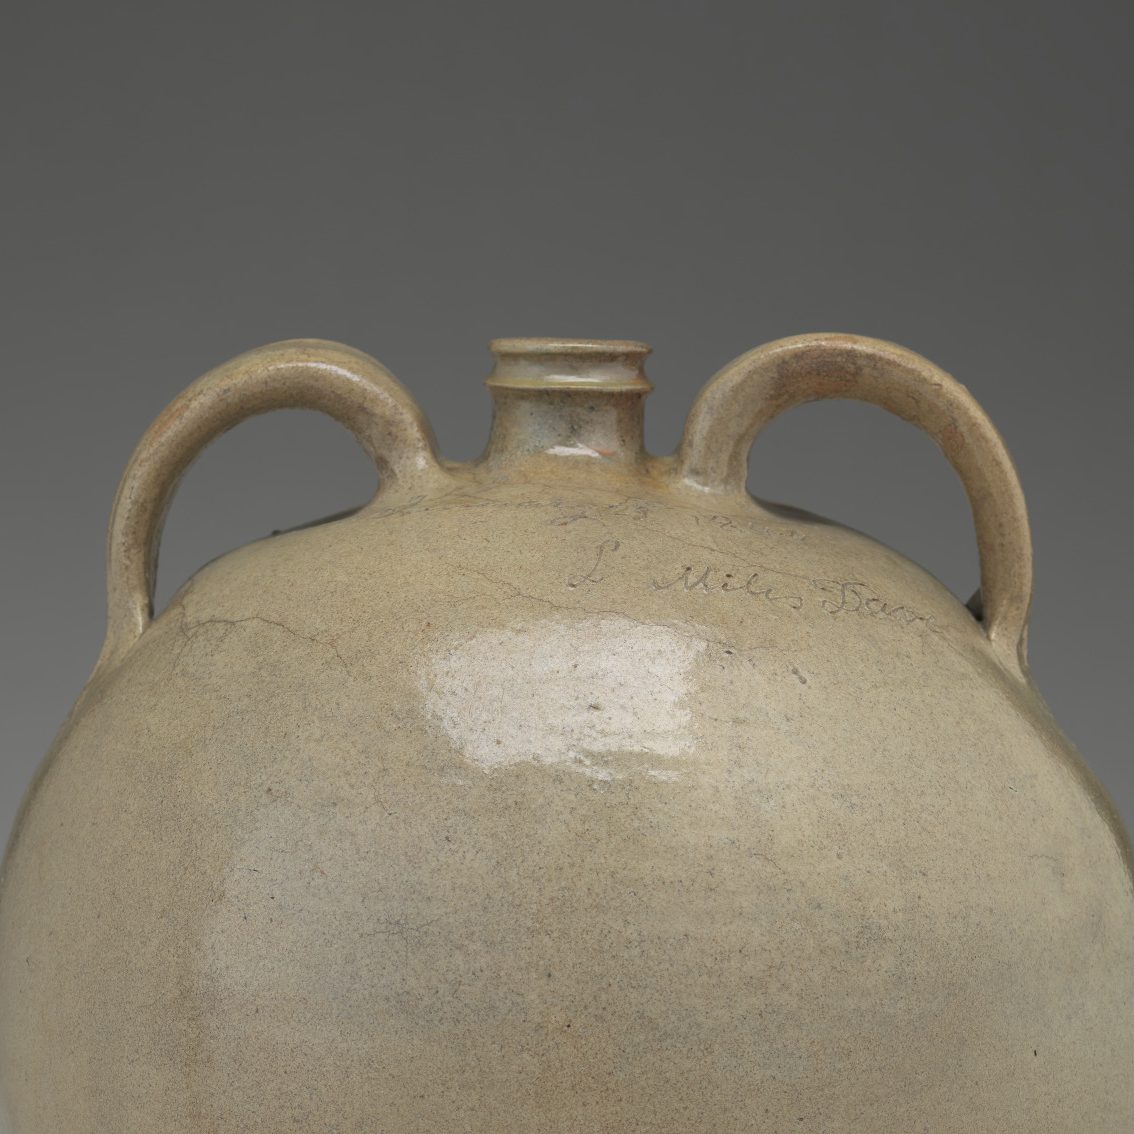 <p>American Galleries. Level 2</p>
<p>Imagine making this huge, two-handled jug out of a ball of clay. Even though this enslaved artist was told to make this, he took an opportunity and a risk to make it his own. How did he personalize this container? Have you ever taken a risk?</p>
